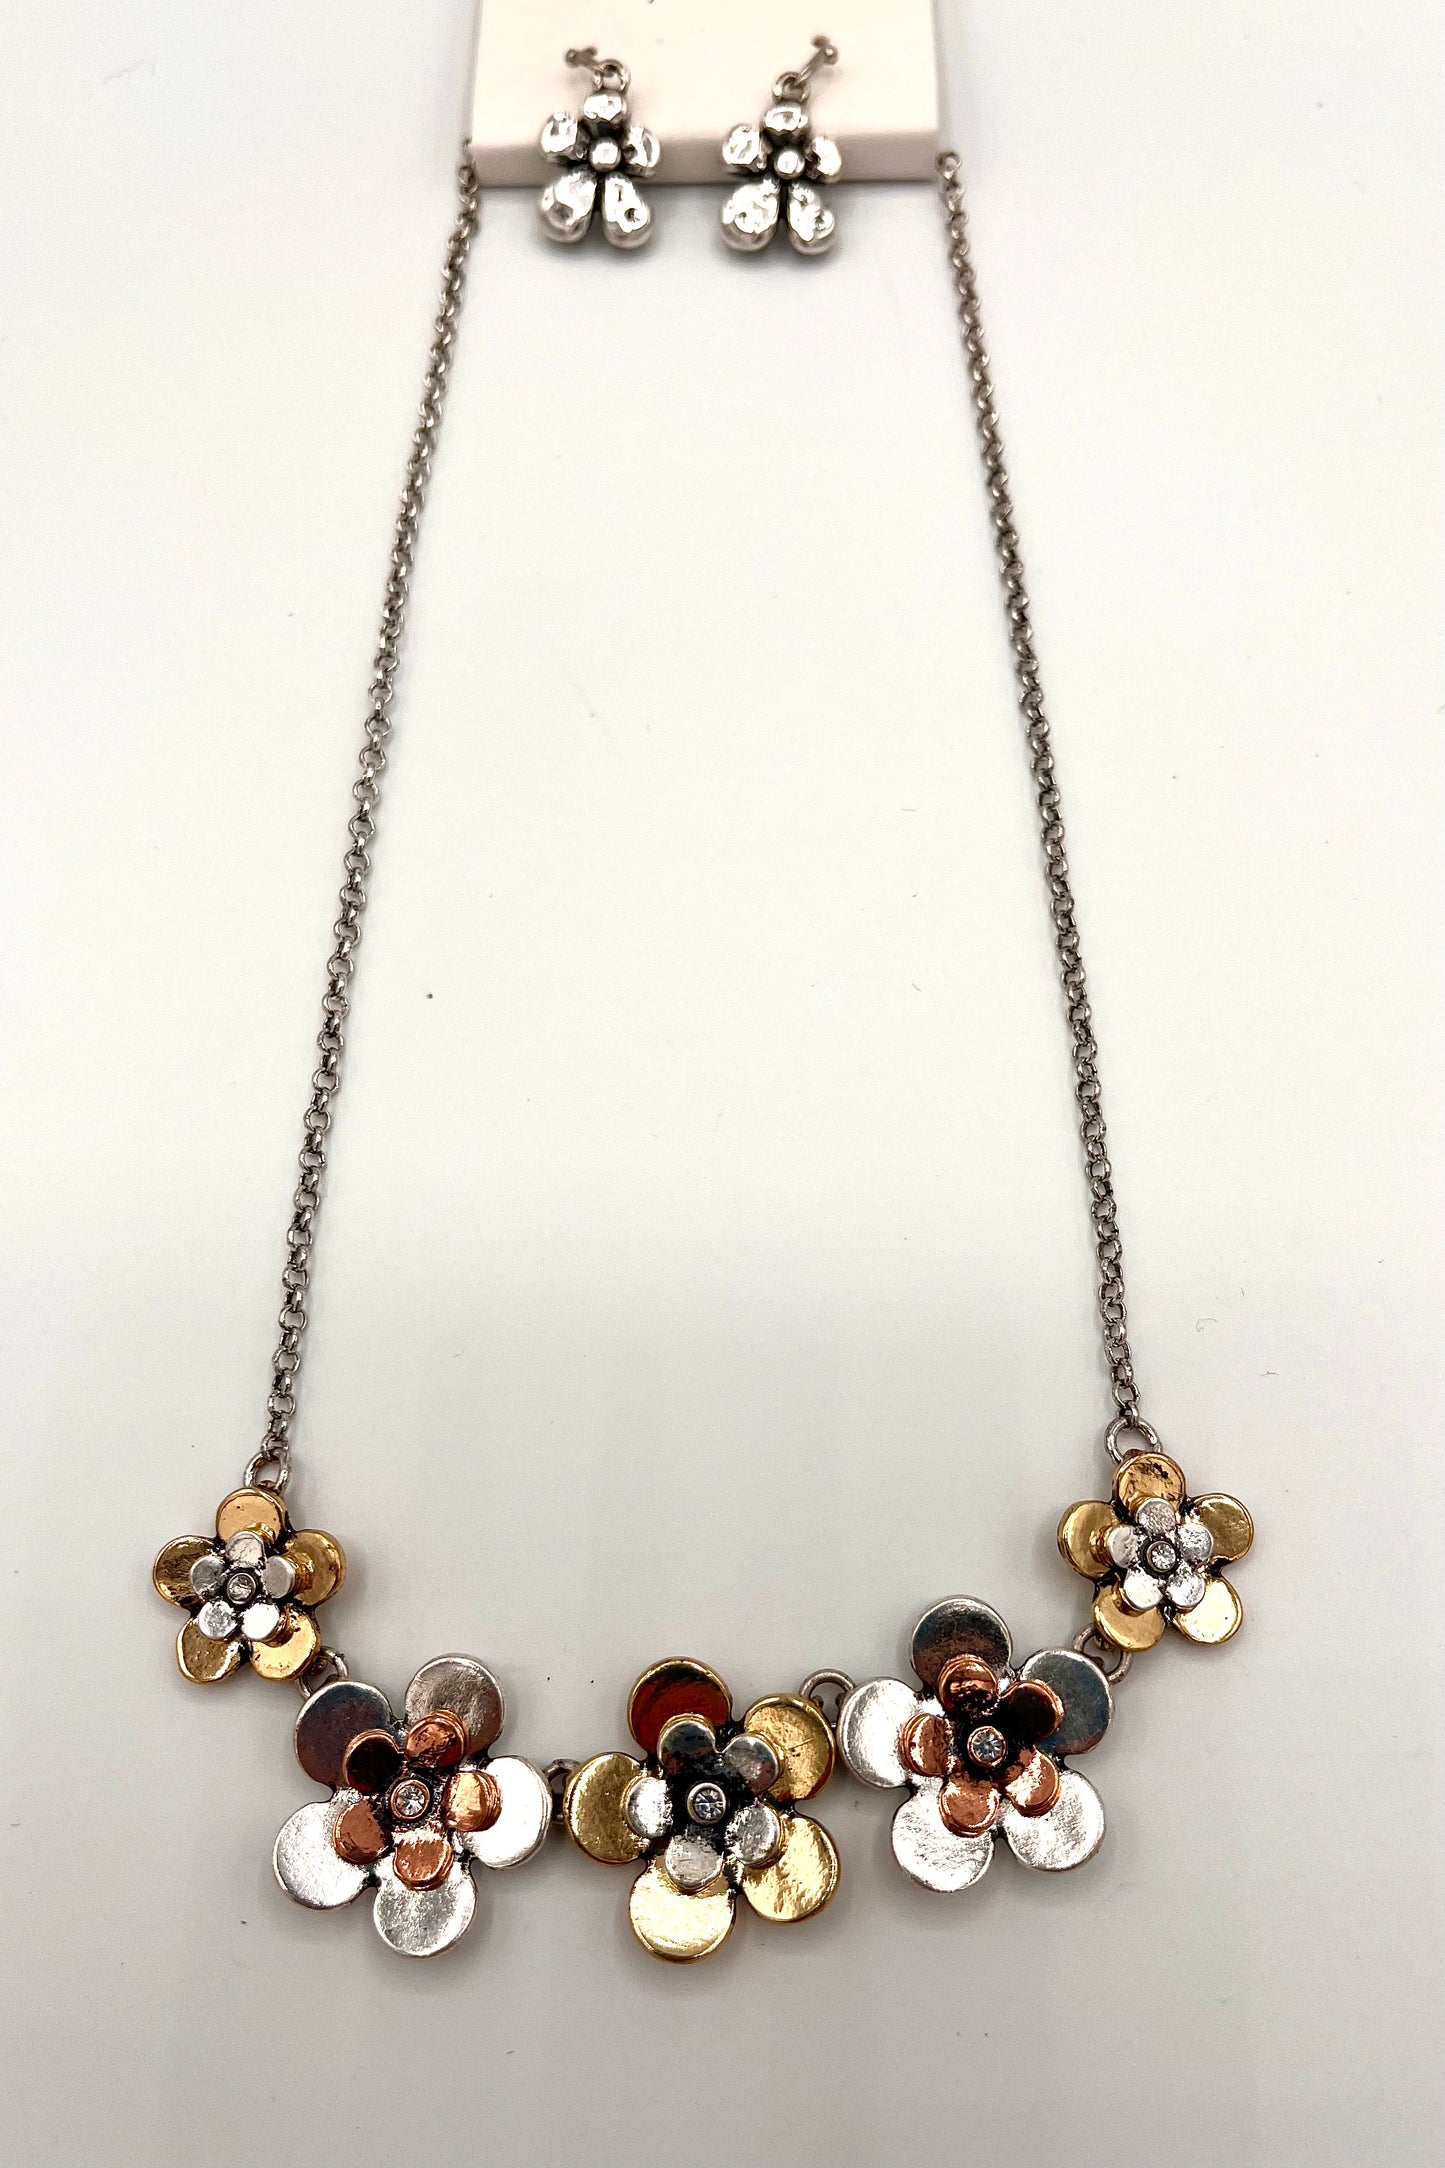 Gold, Silver, Copper Daisy Petal and Necklace Earrings Set